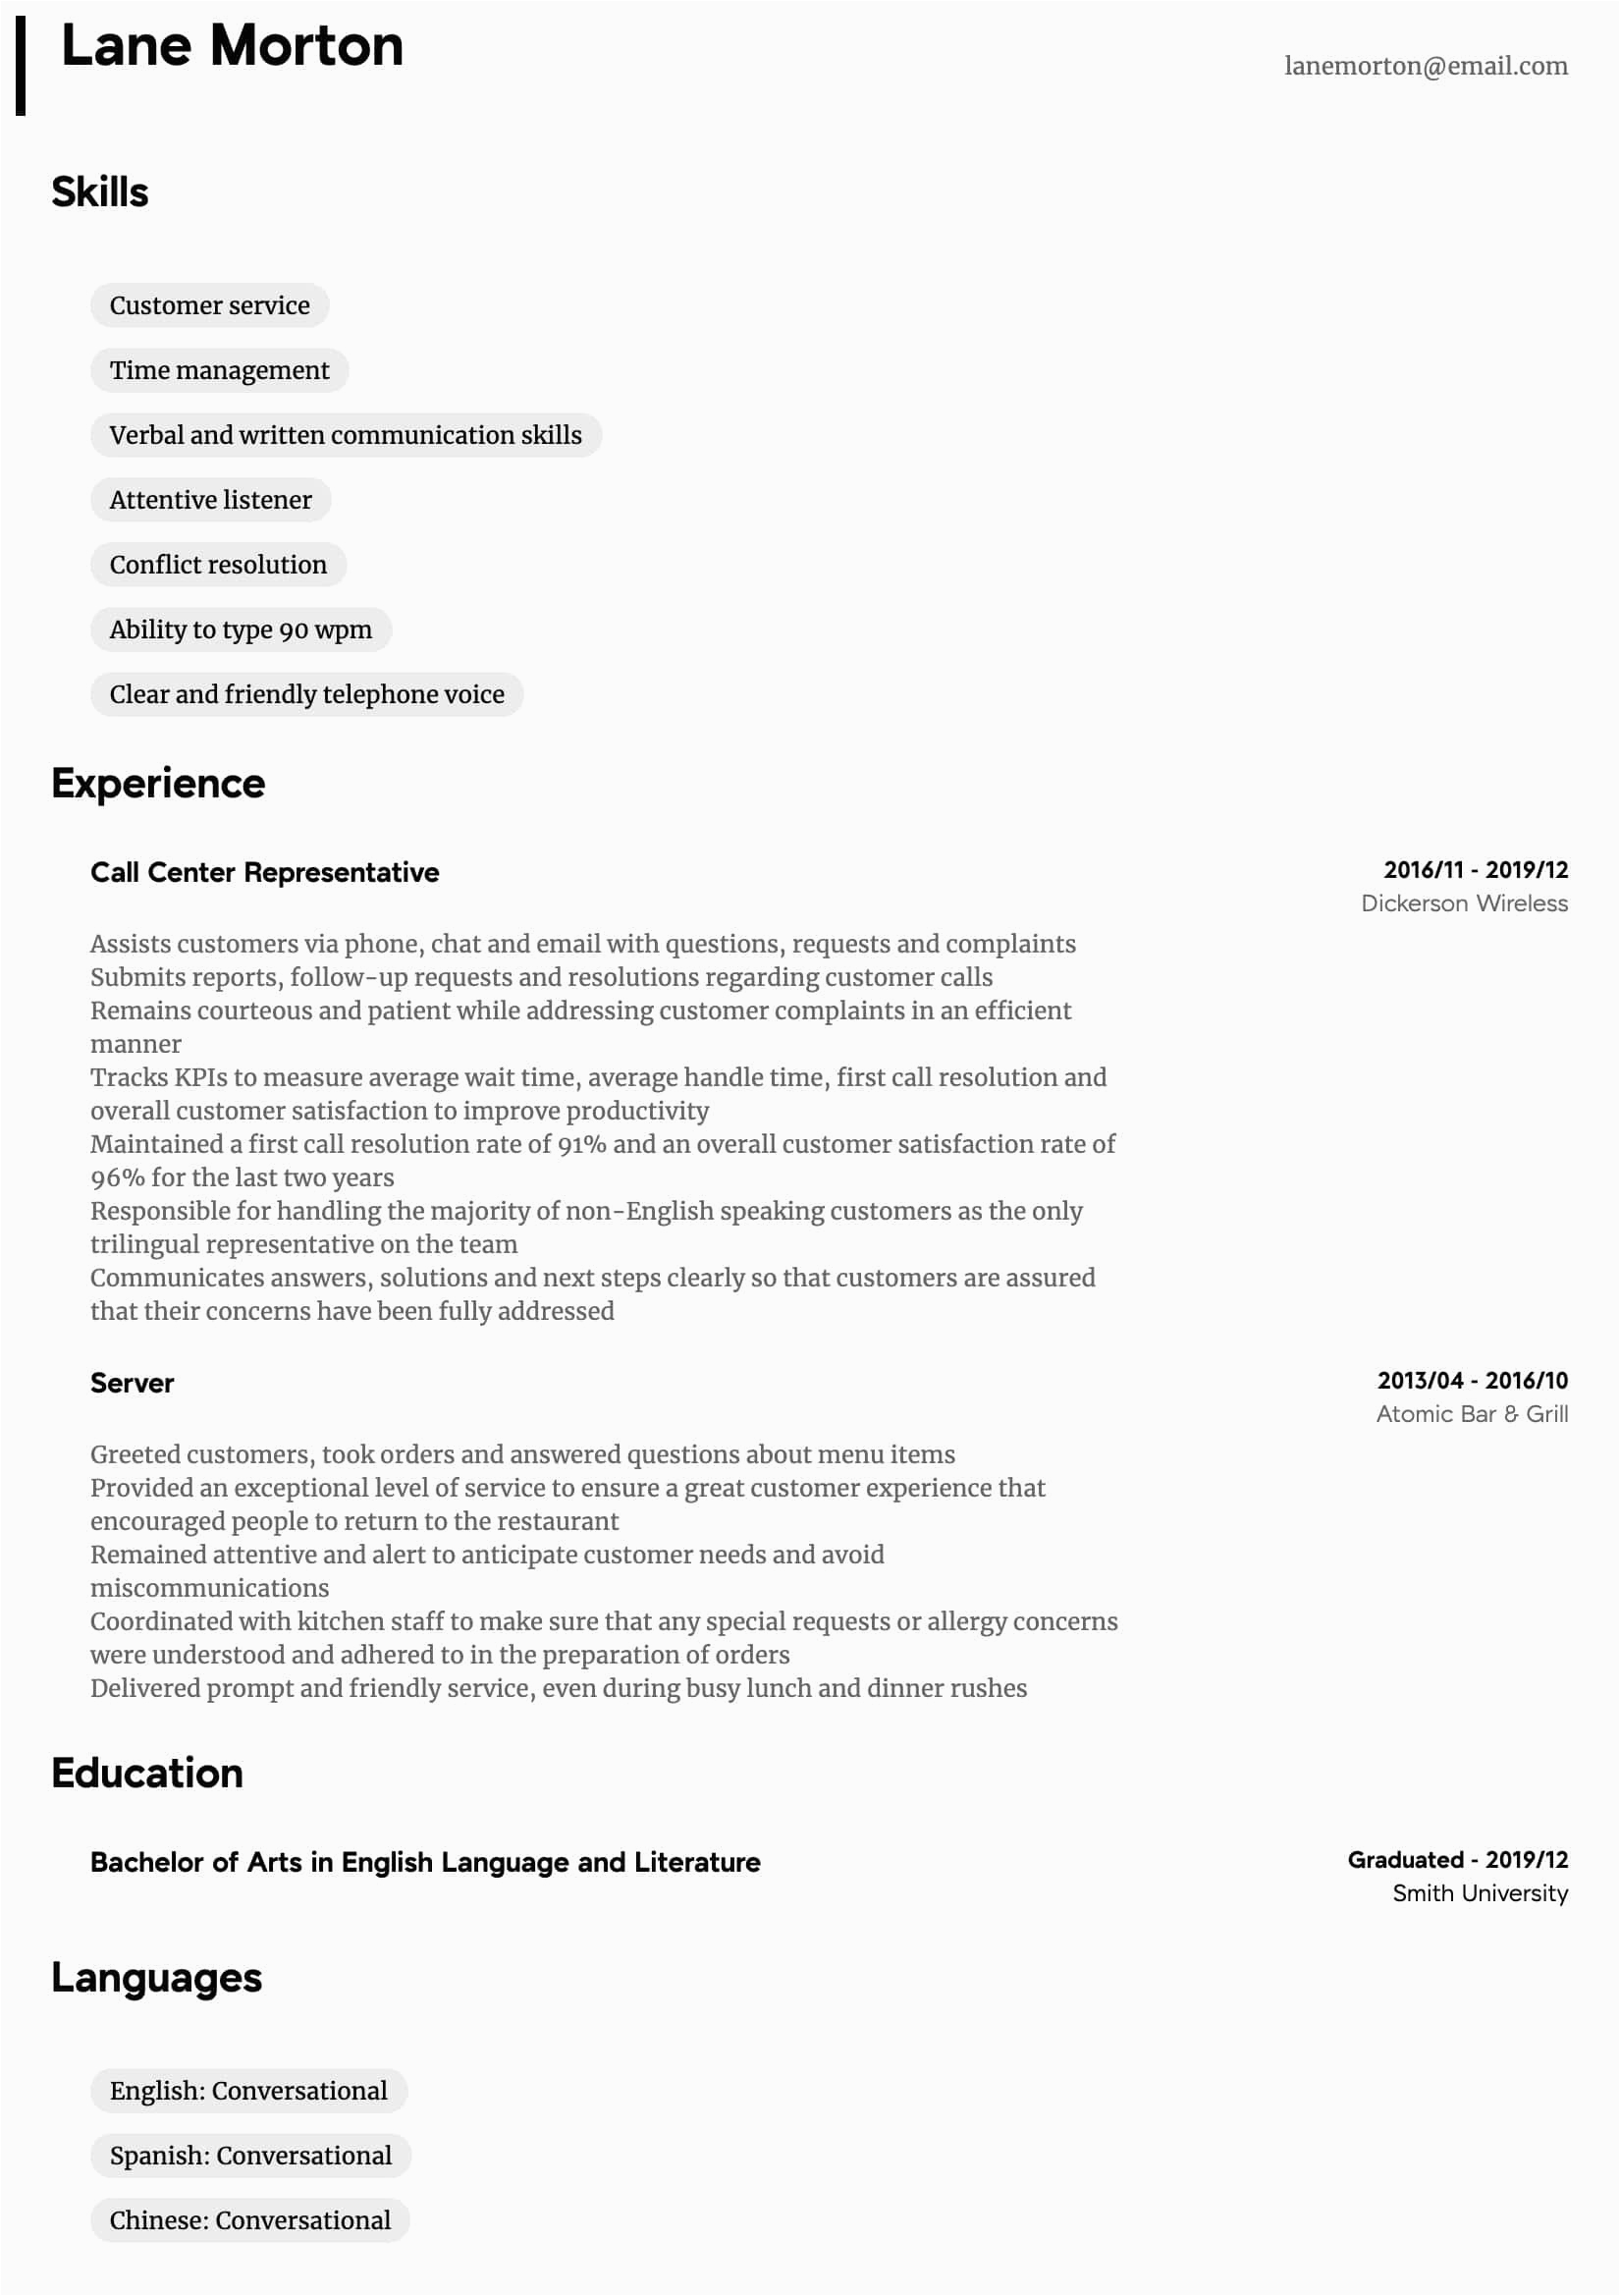 Resume Sample for Call Center with Experience Call Center Representative Resume Samples